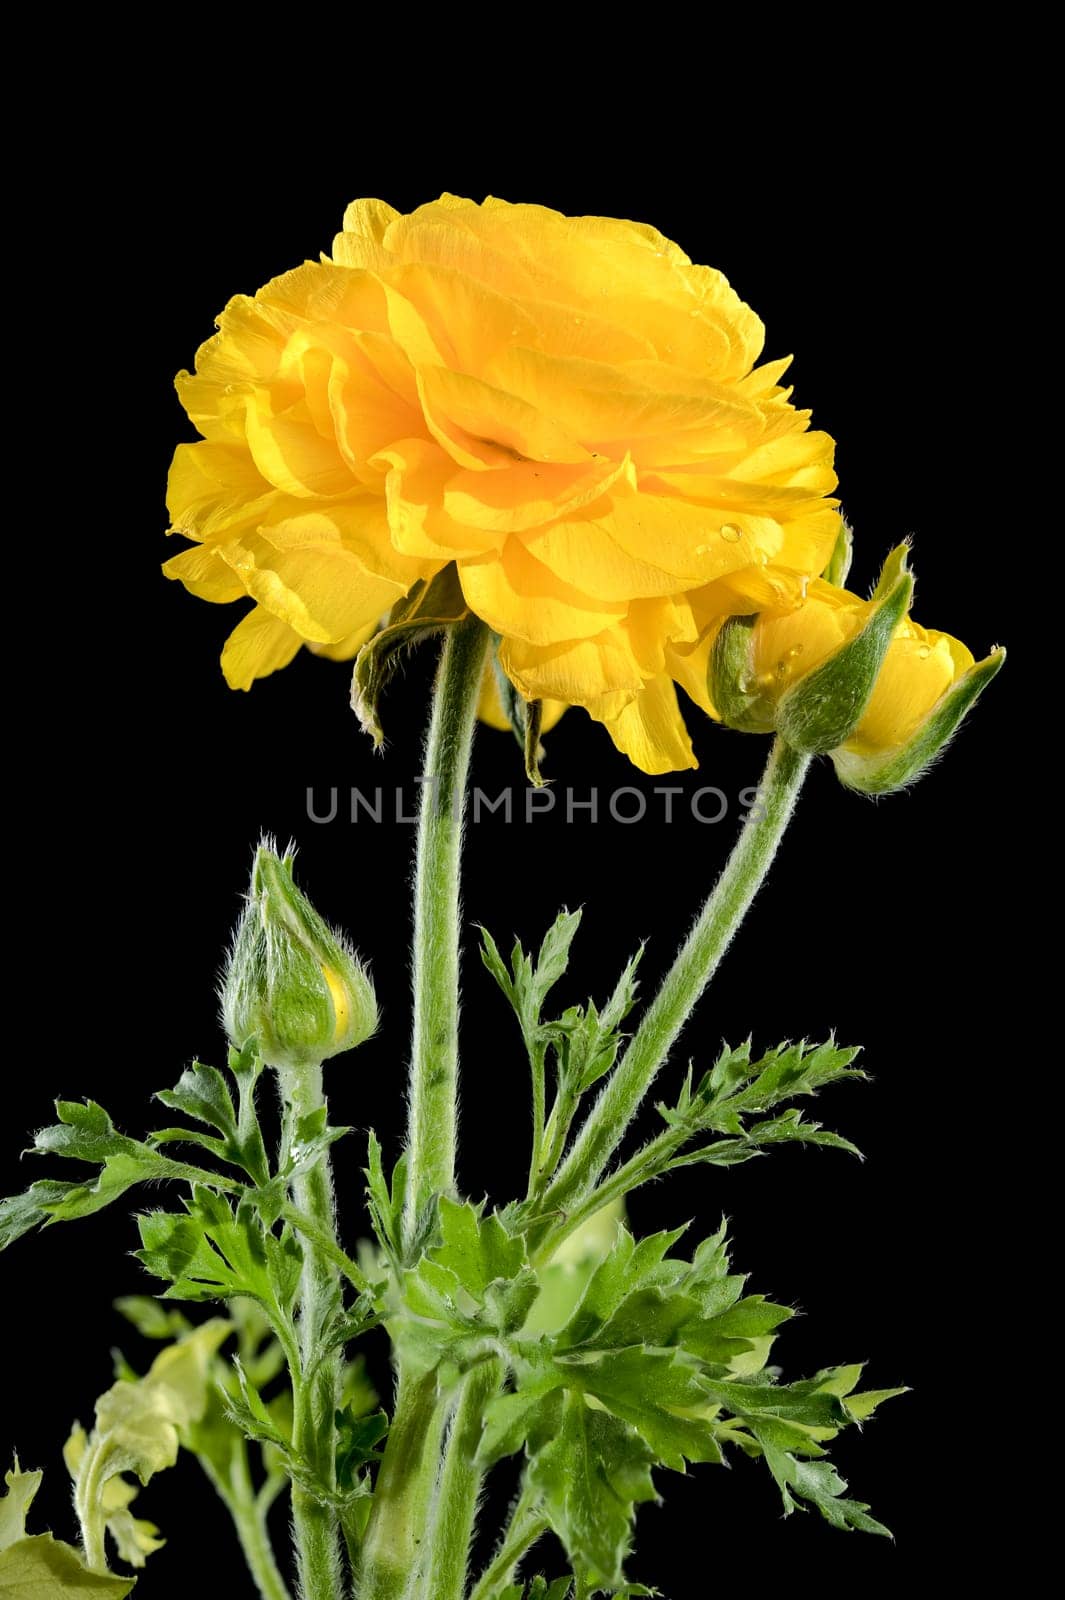 Beautiful blooming yellow ranunculus flower isolated on a black background. Flower head close-up.